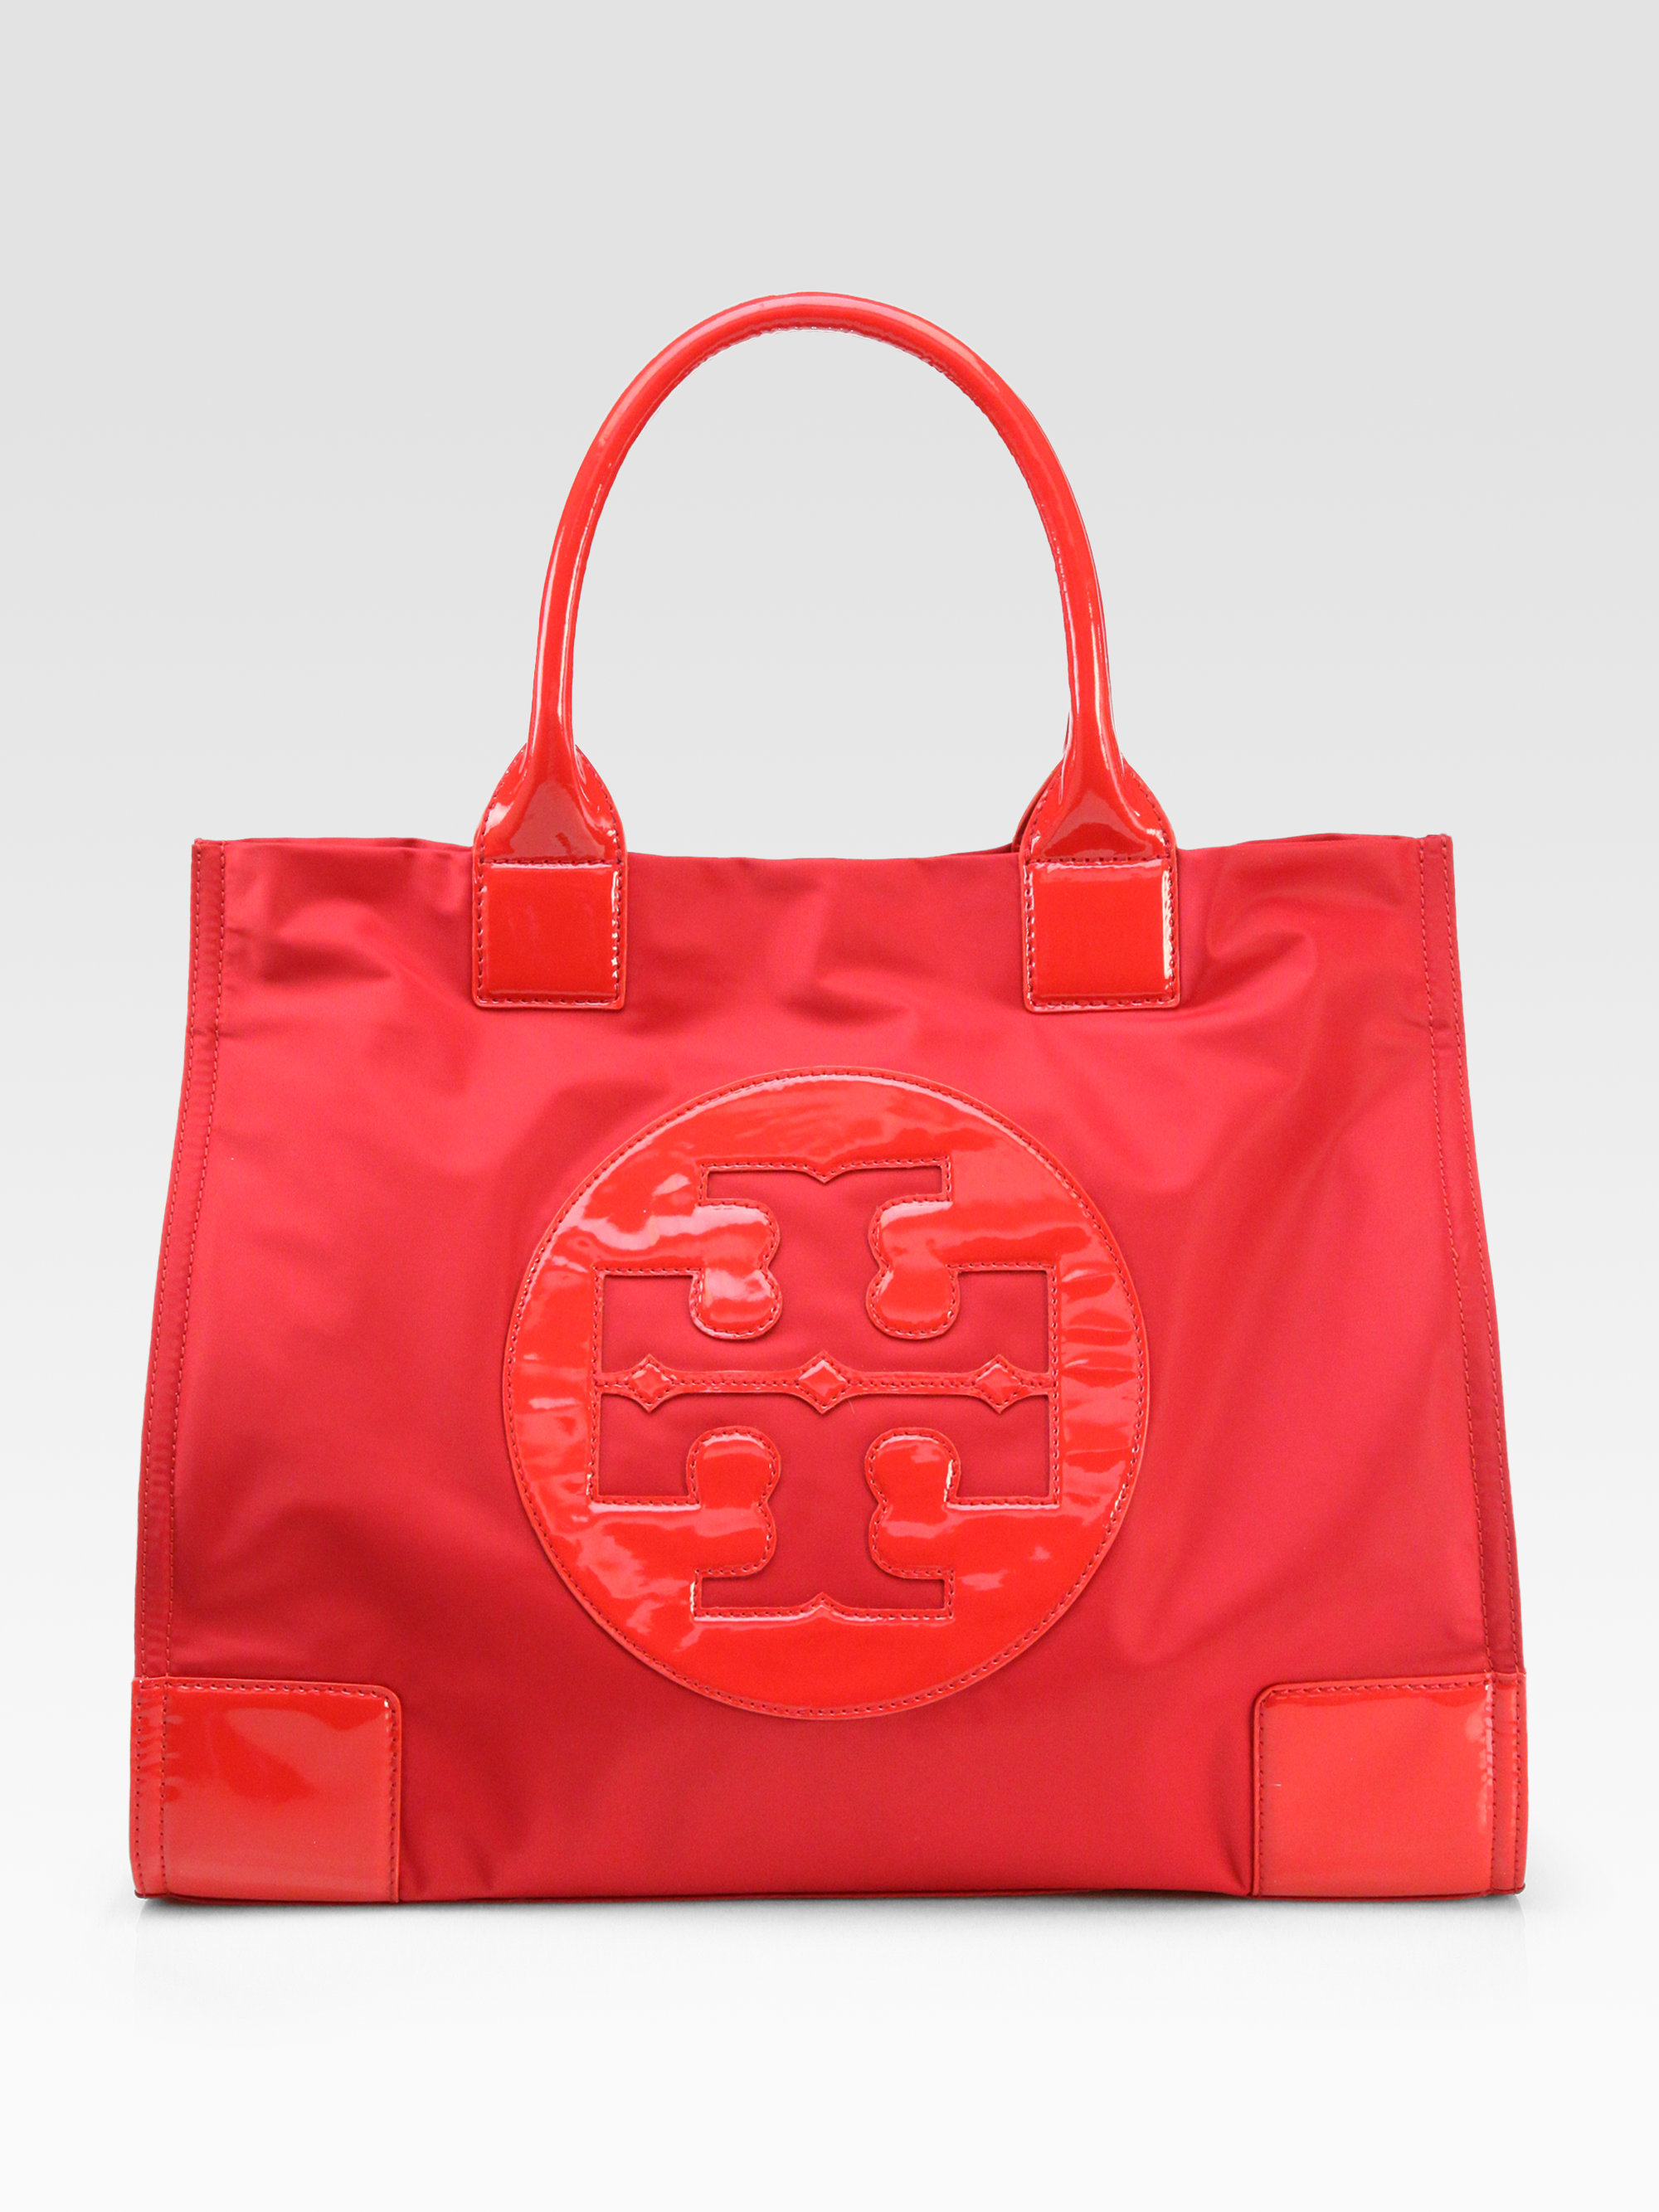 Lyst - Tory Burch Ella Nylon & Faux Leather Tote in Red